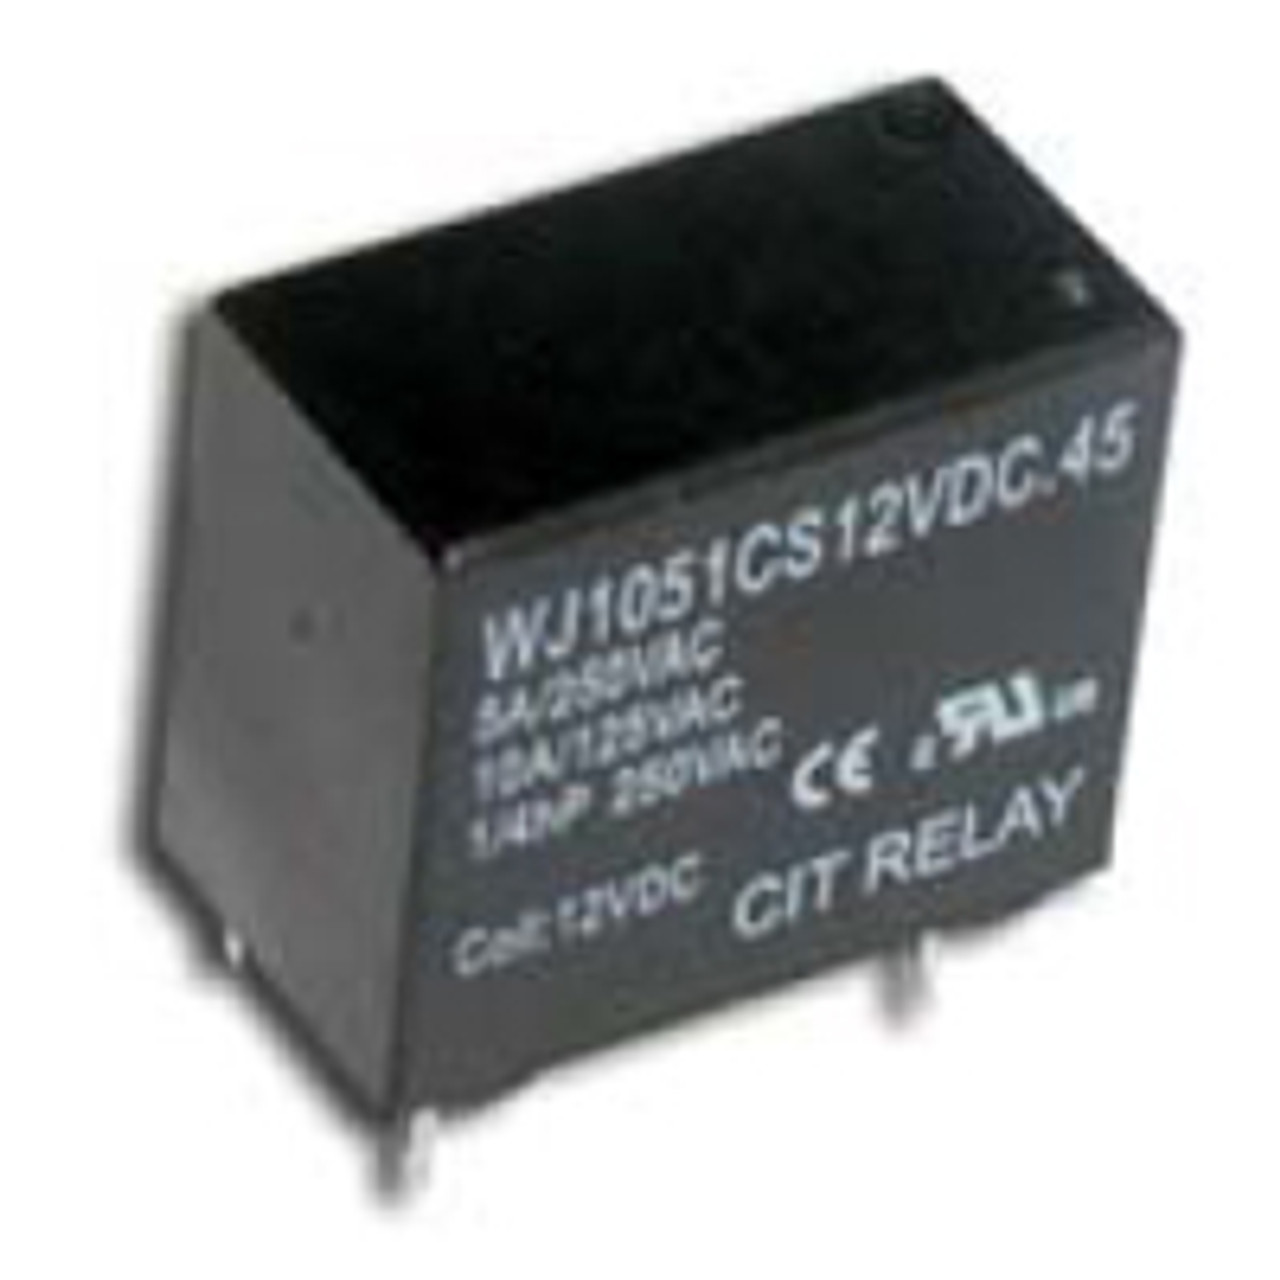 CIT Relay and Switch J1051C3VDC.45 General Purpose Relays